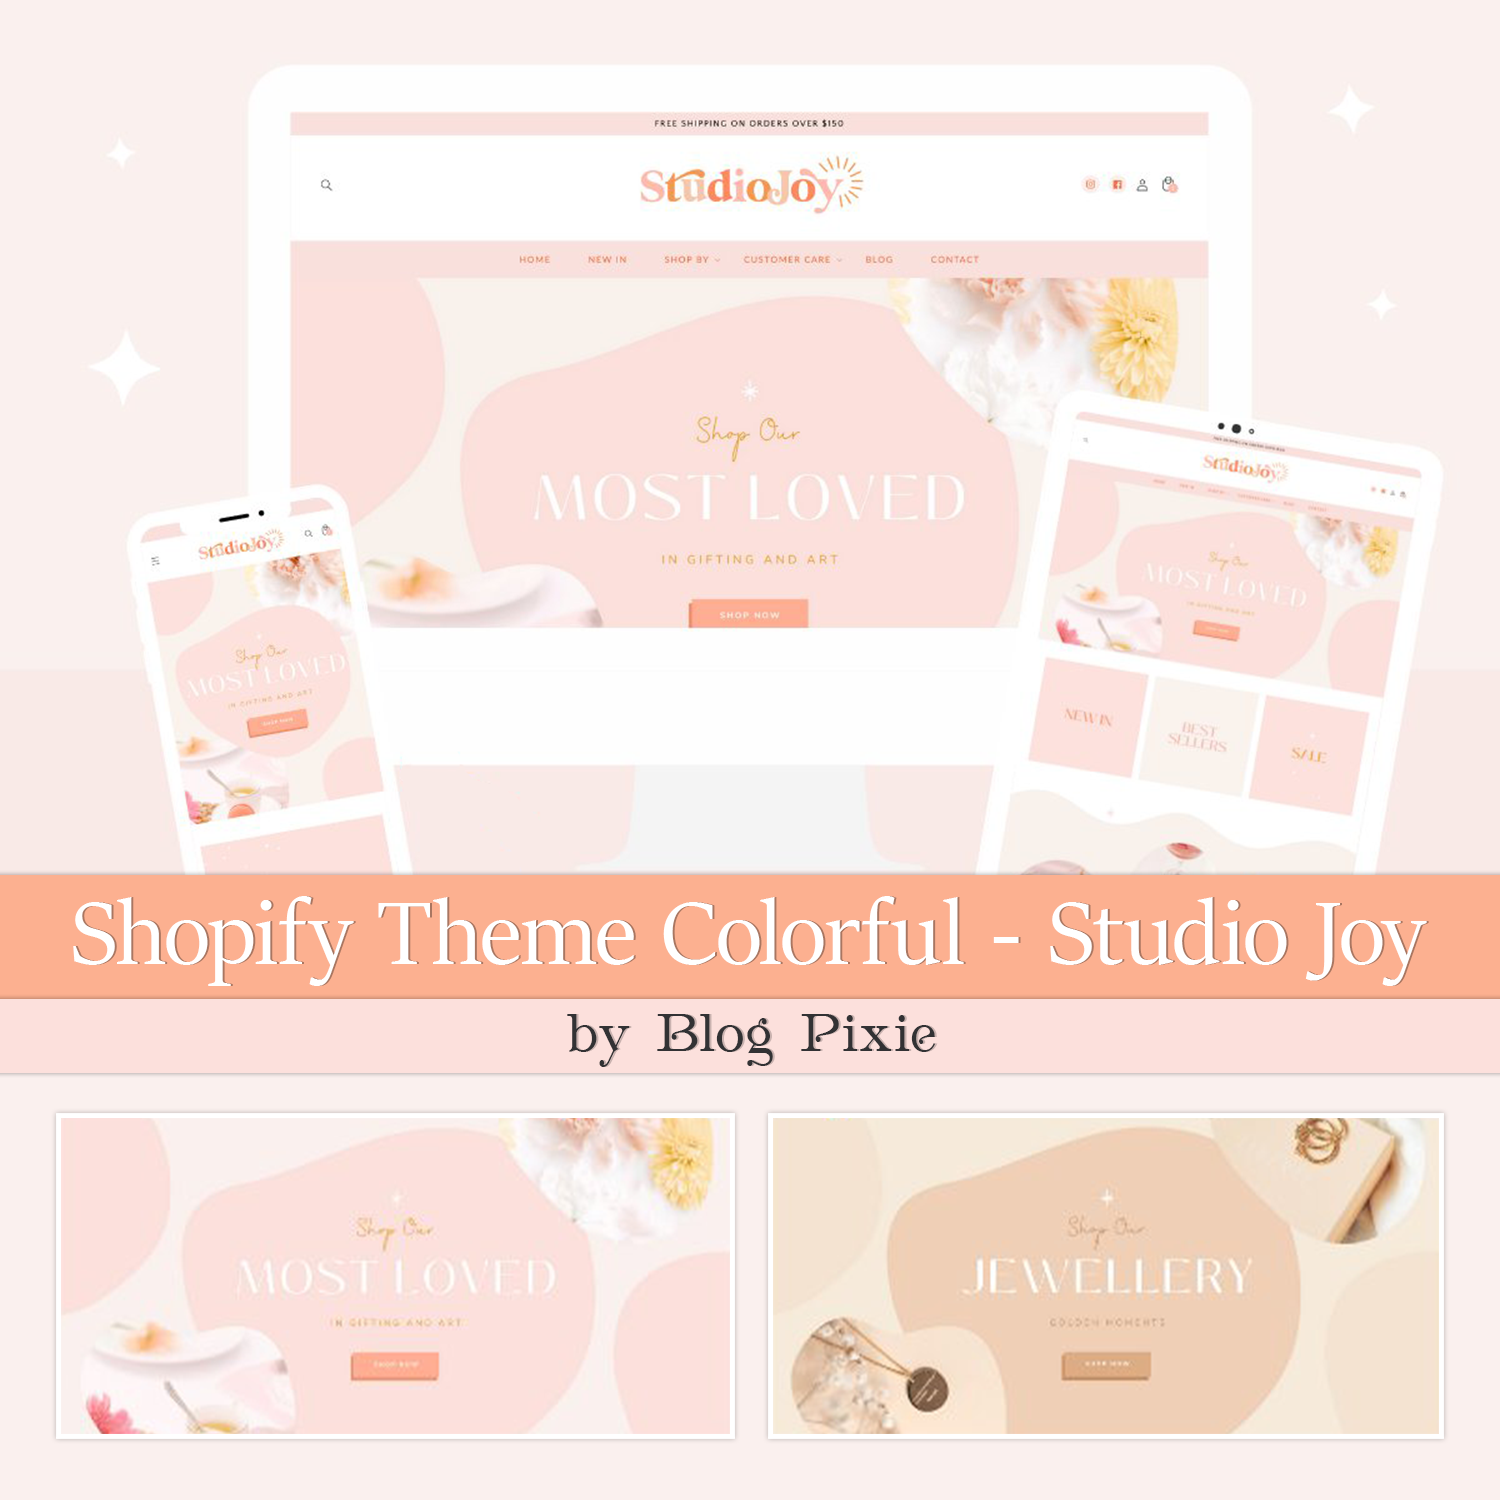 A set of page images of an adorable Shopify theme in pastel colors.